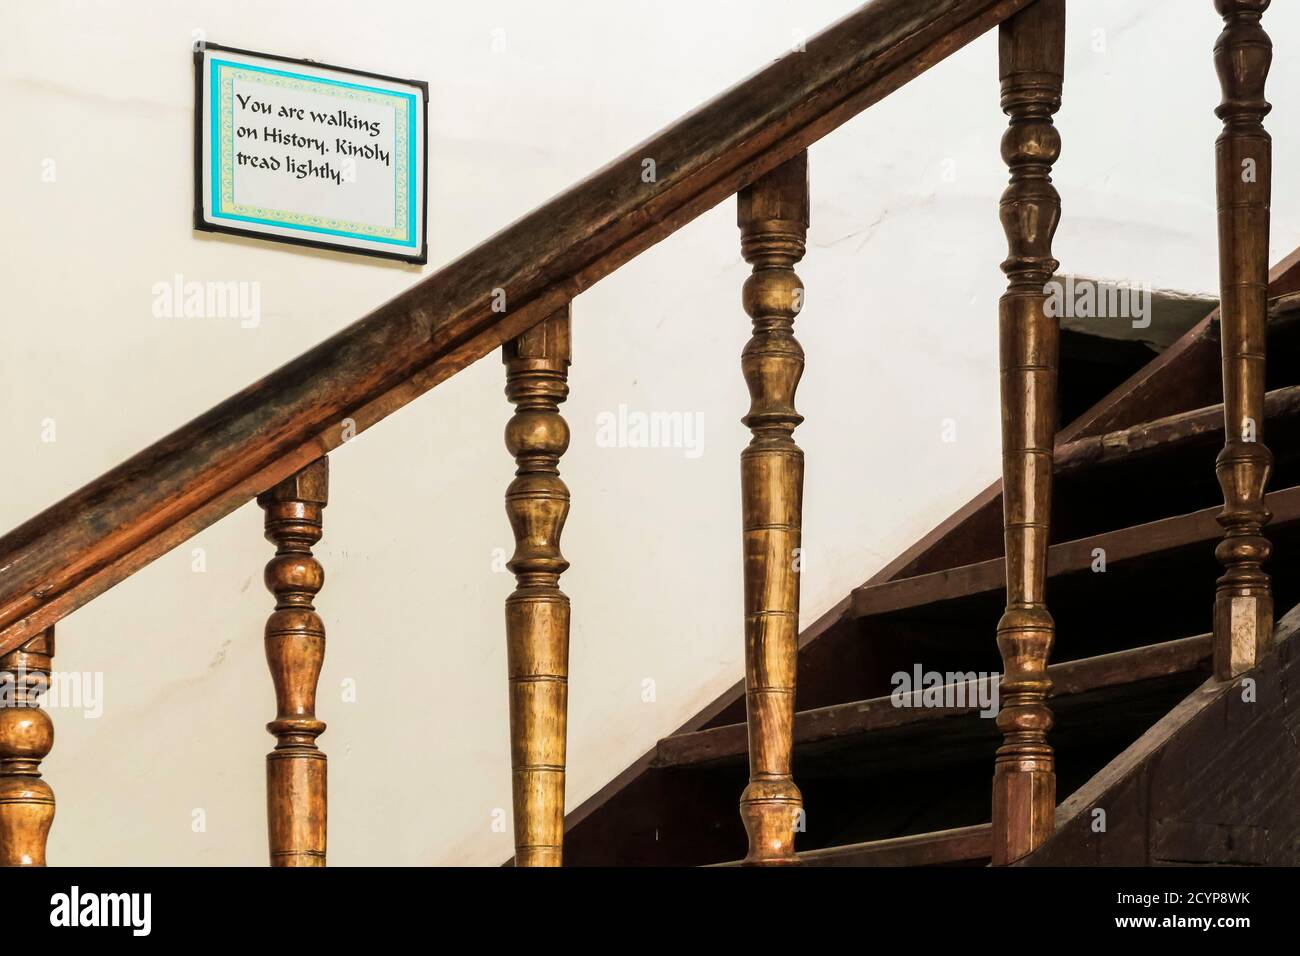 Stairway & sign in the Portuguese colonial style Old Courtyard Hotel in Fort Cochin; Princess St, Kochi (Cochin), Kerala, India Stock Photo